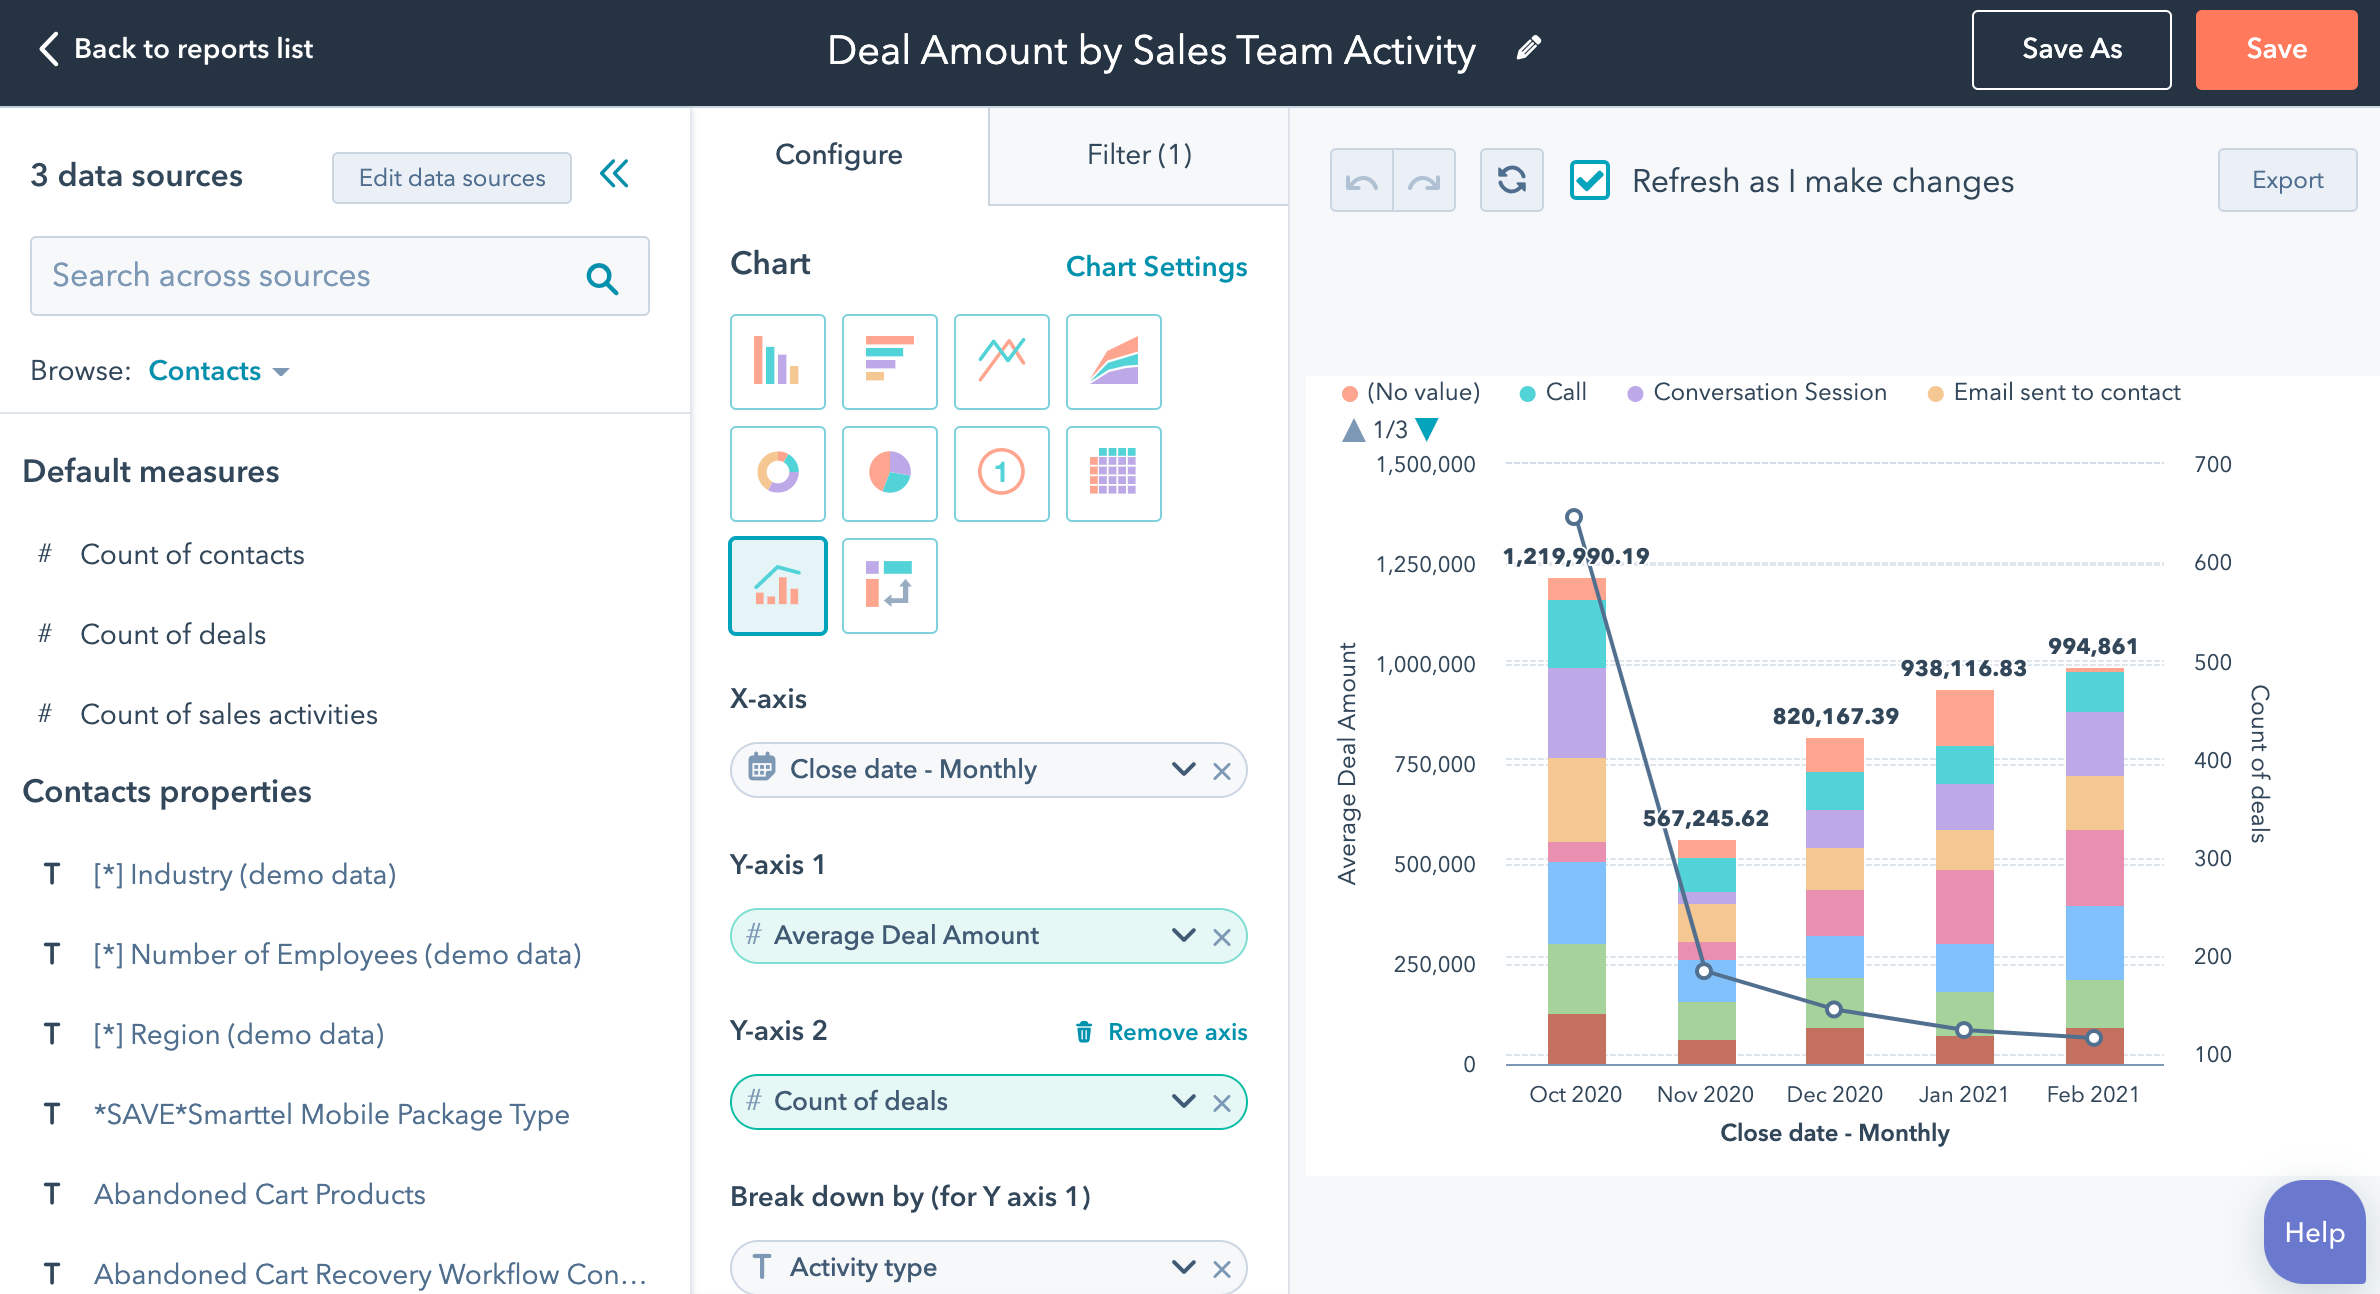 Marketing analytics, screenshot of deal amount by sales team activity report